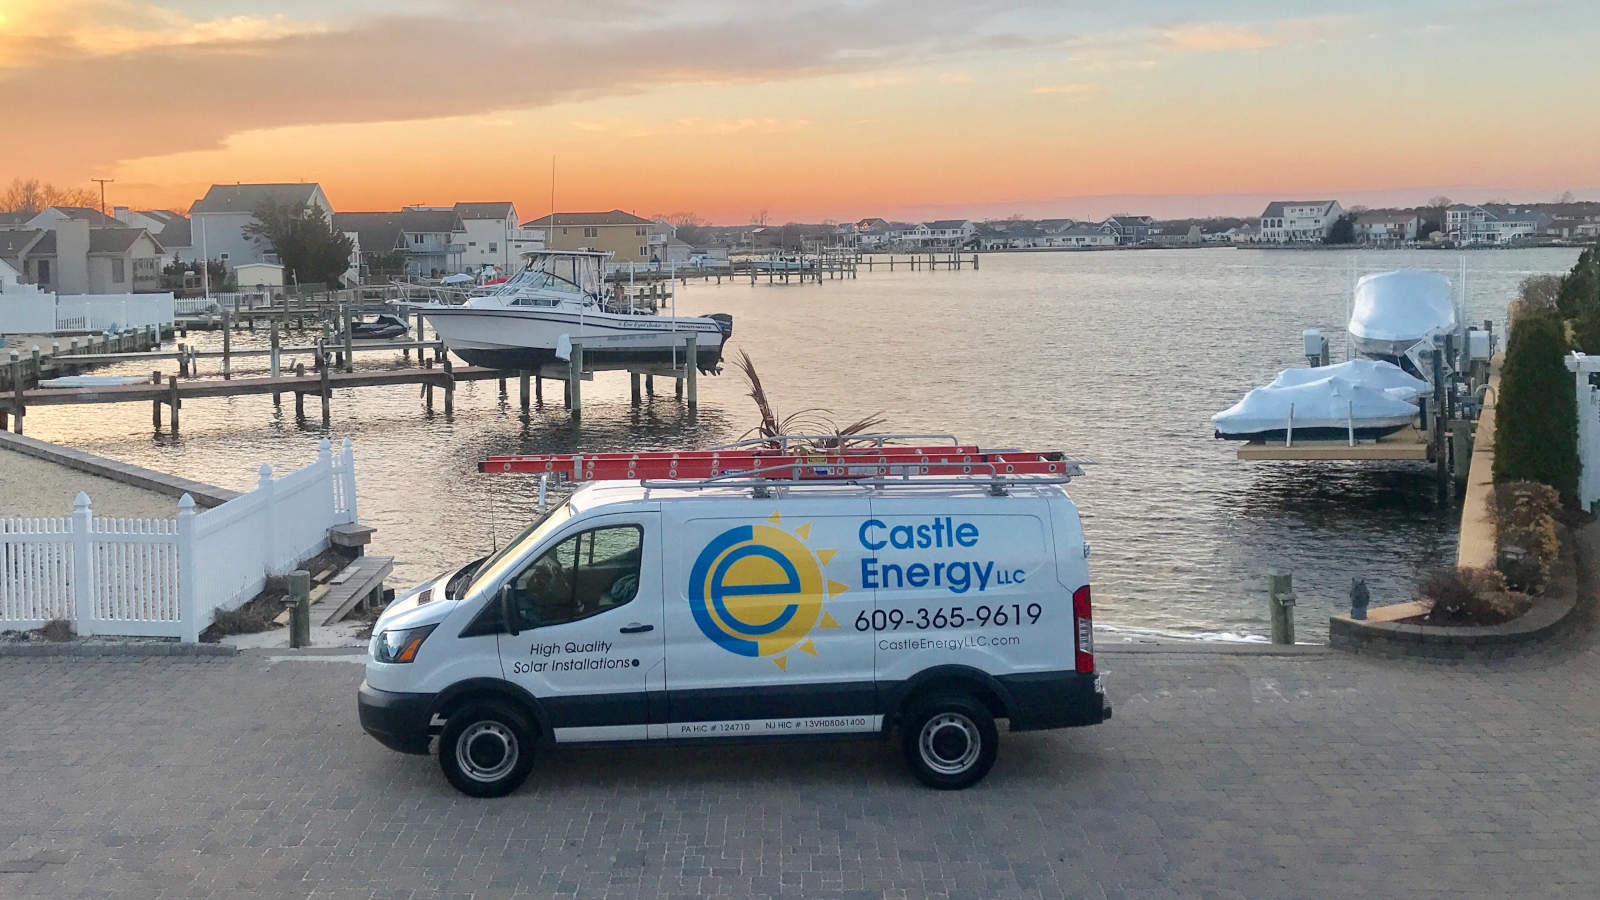 Castle Energy van parked in front of a bay during the sunset